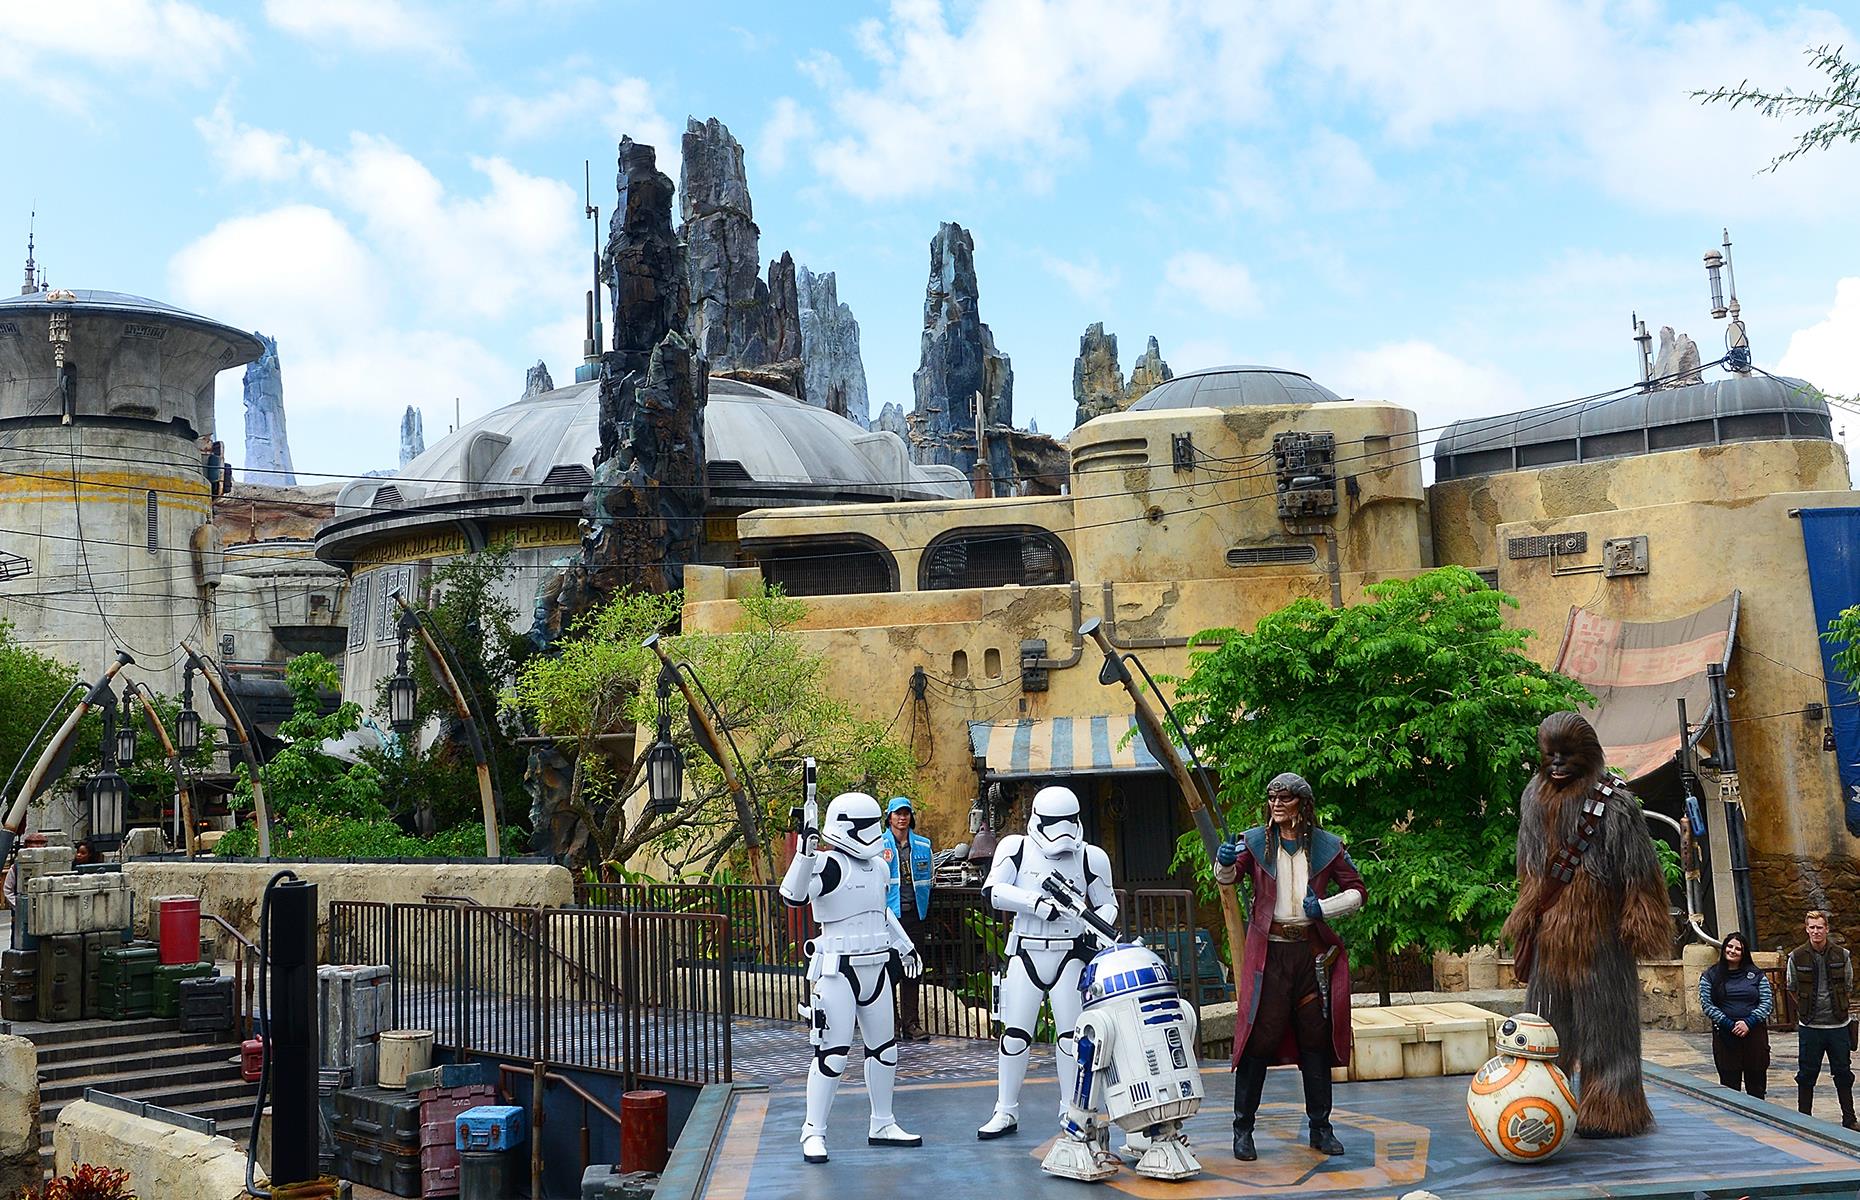 Fans of a galaxy far, far away rejoiced as Star Wars: Galaxy’s Edge – a land entirely dedicated to the celebrated sci-fi franchise – debuted at Florida's Walt Disney World Resort in the summer of 2019. This snap shows the attraction's dedication on 28 August, before its grand public opening the next day. Chewbacca and R2D2 join in the celebrations, with Batuu's Black Spires rising up behind them.